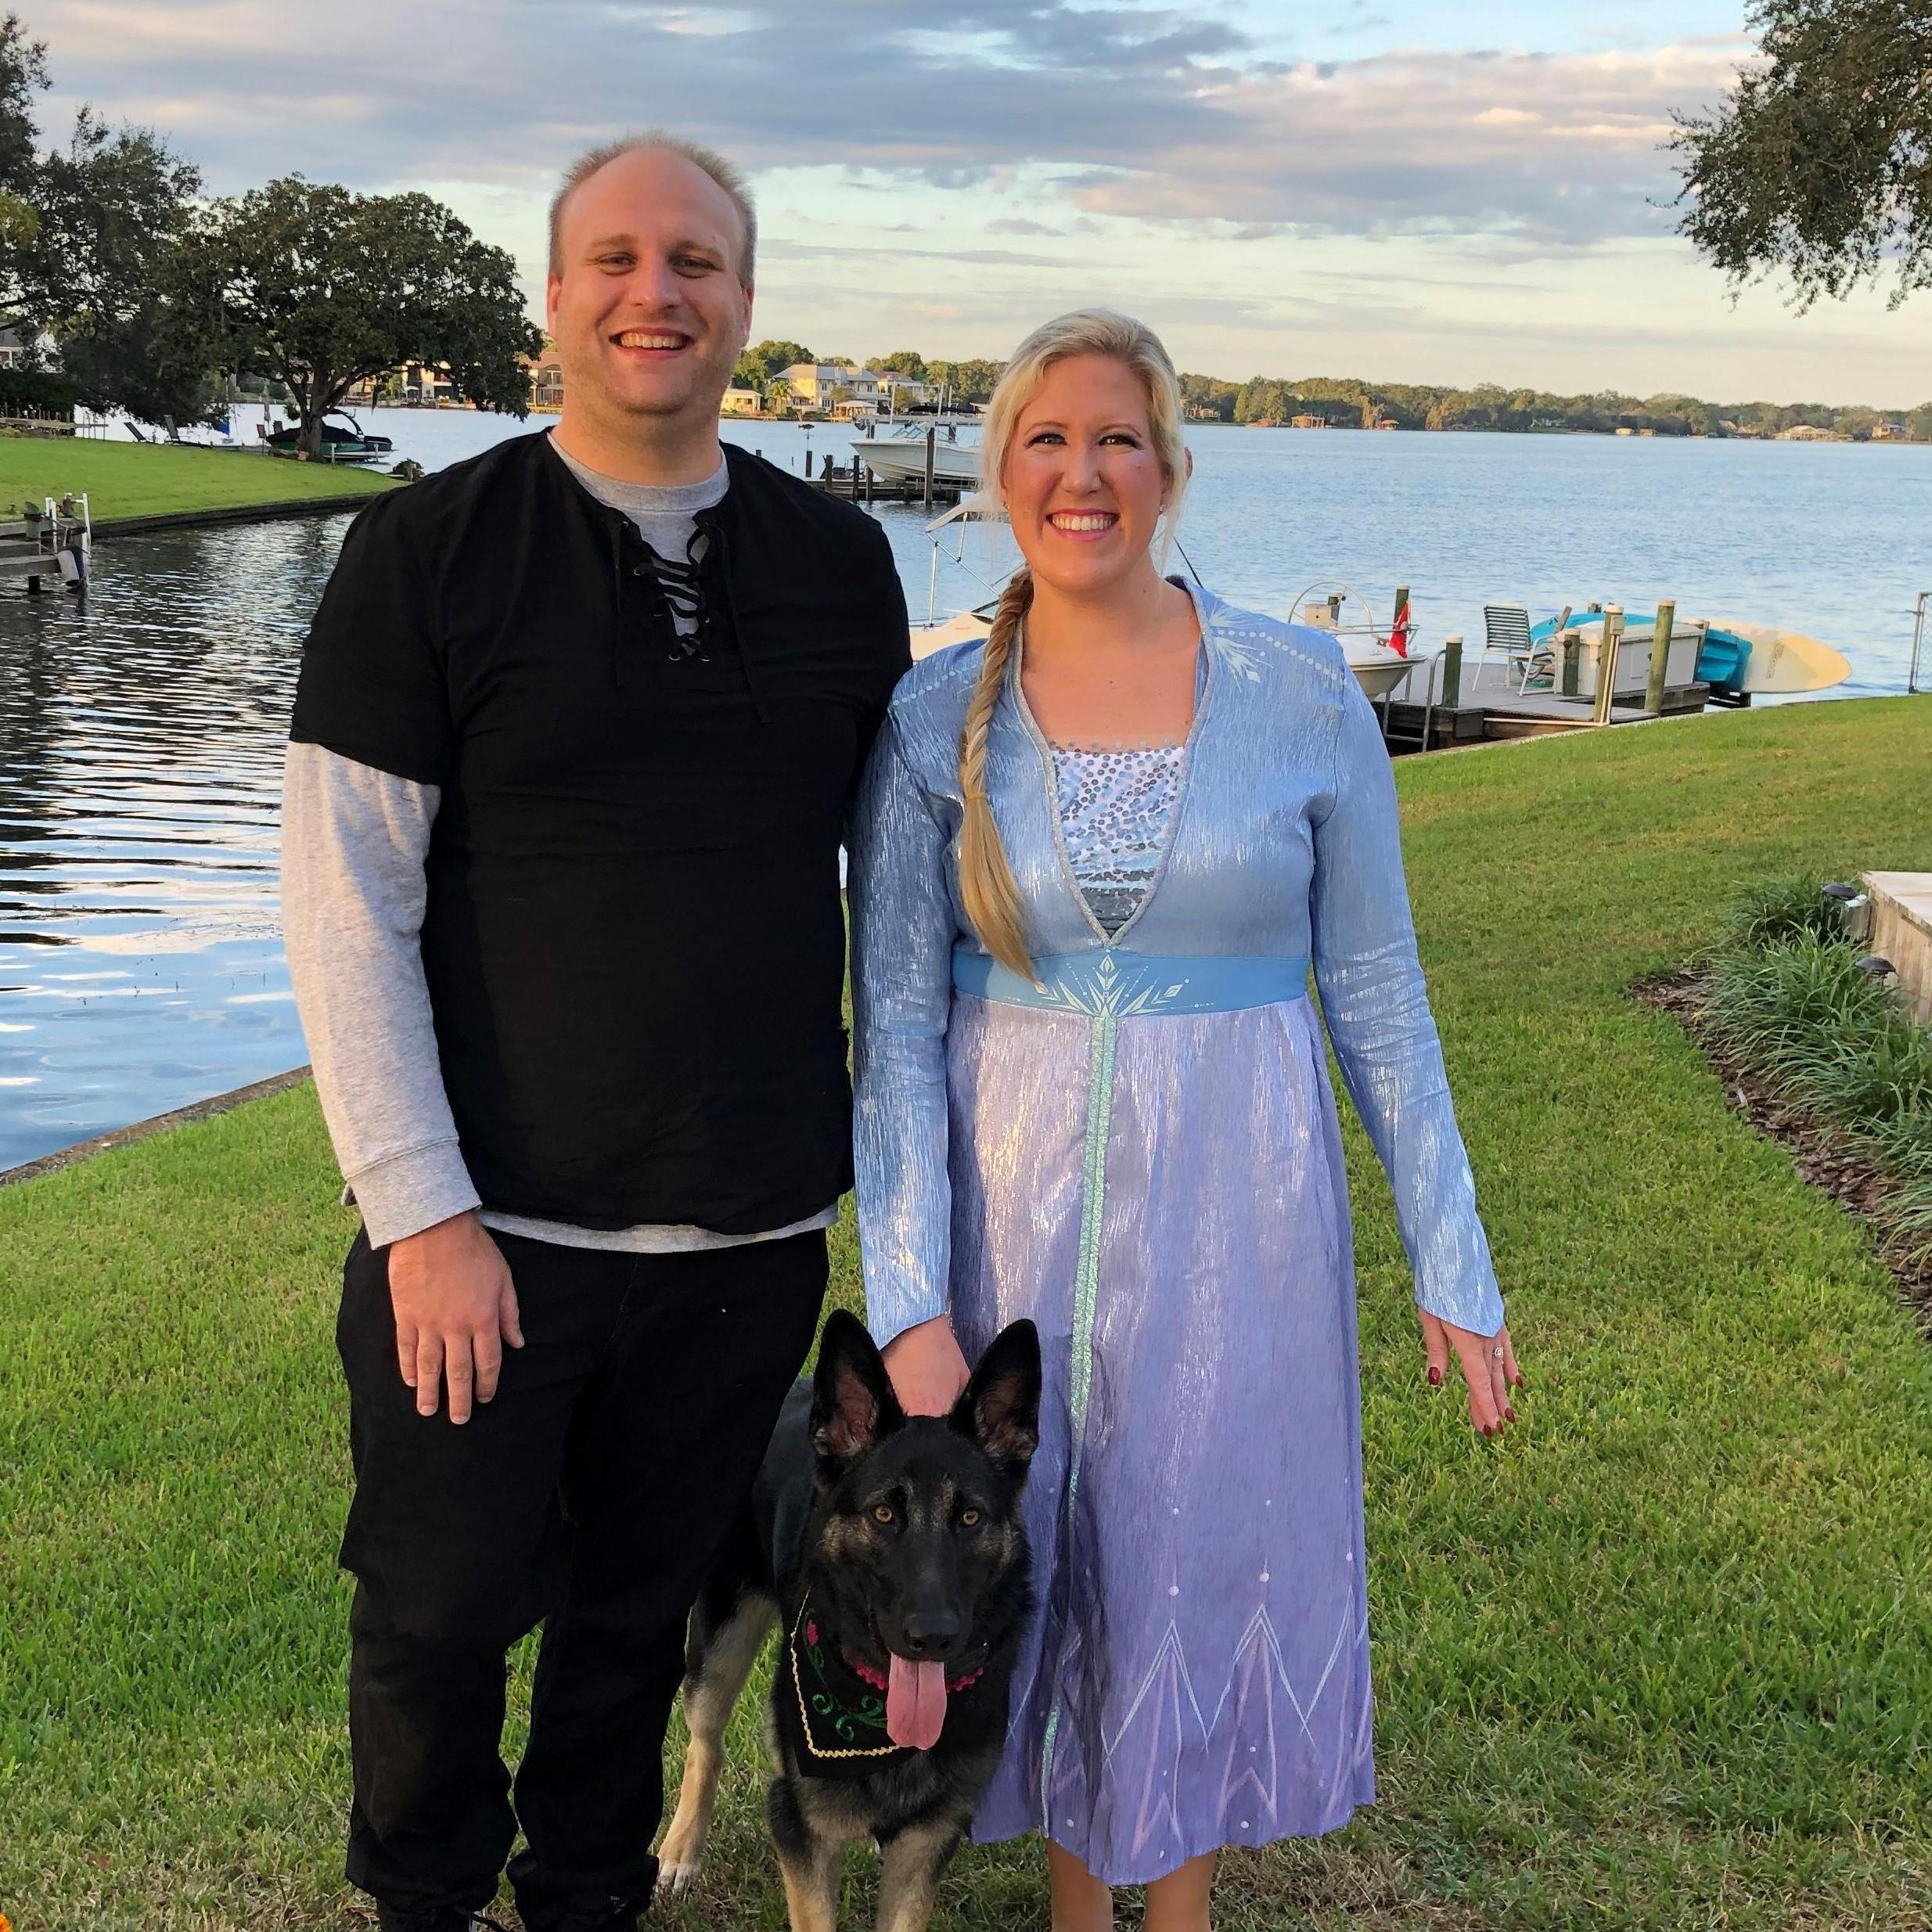 Our "Frozen" Family with our dog Anna